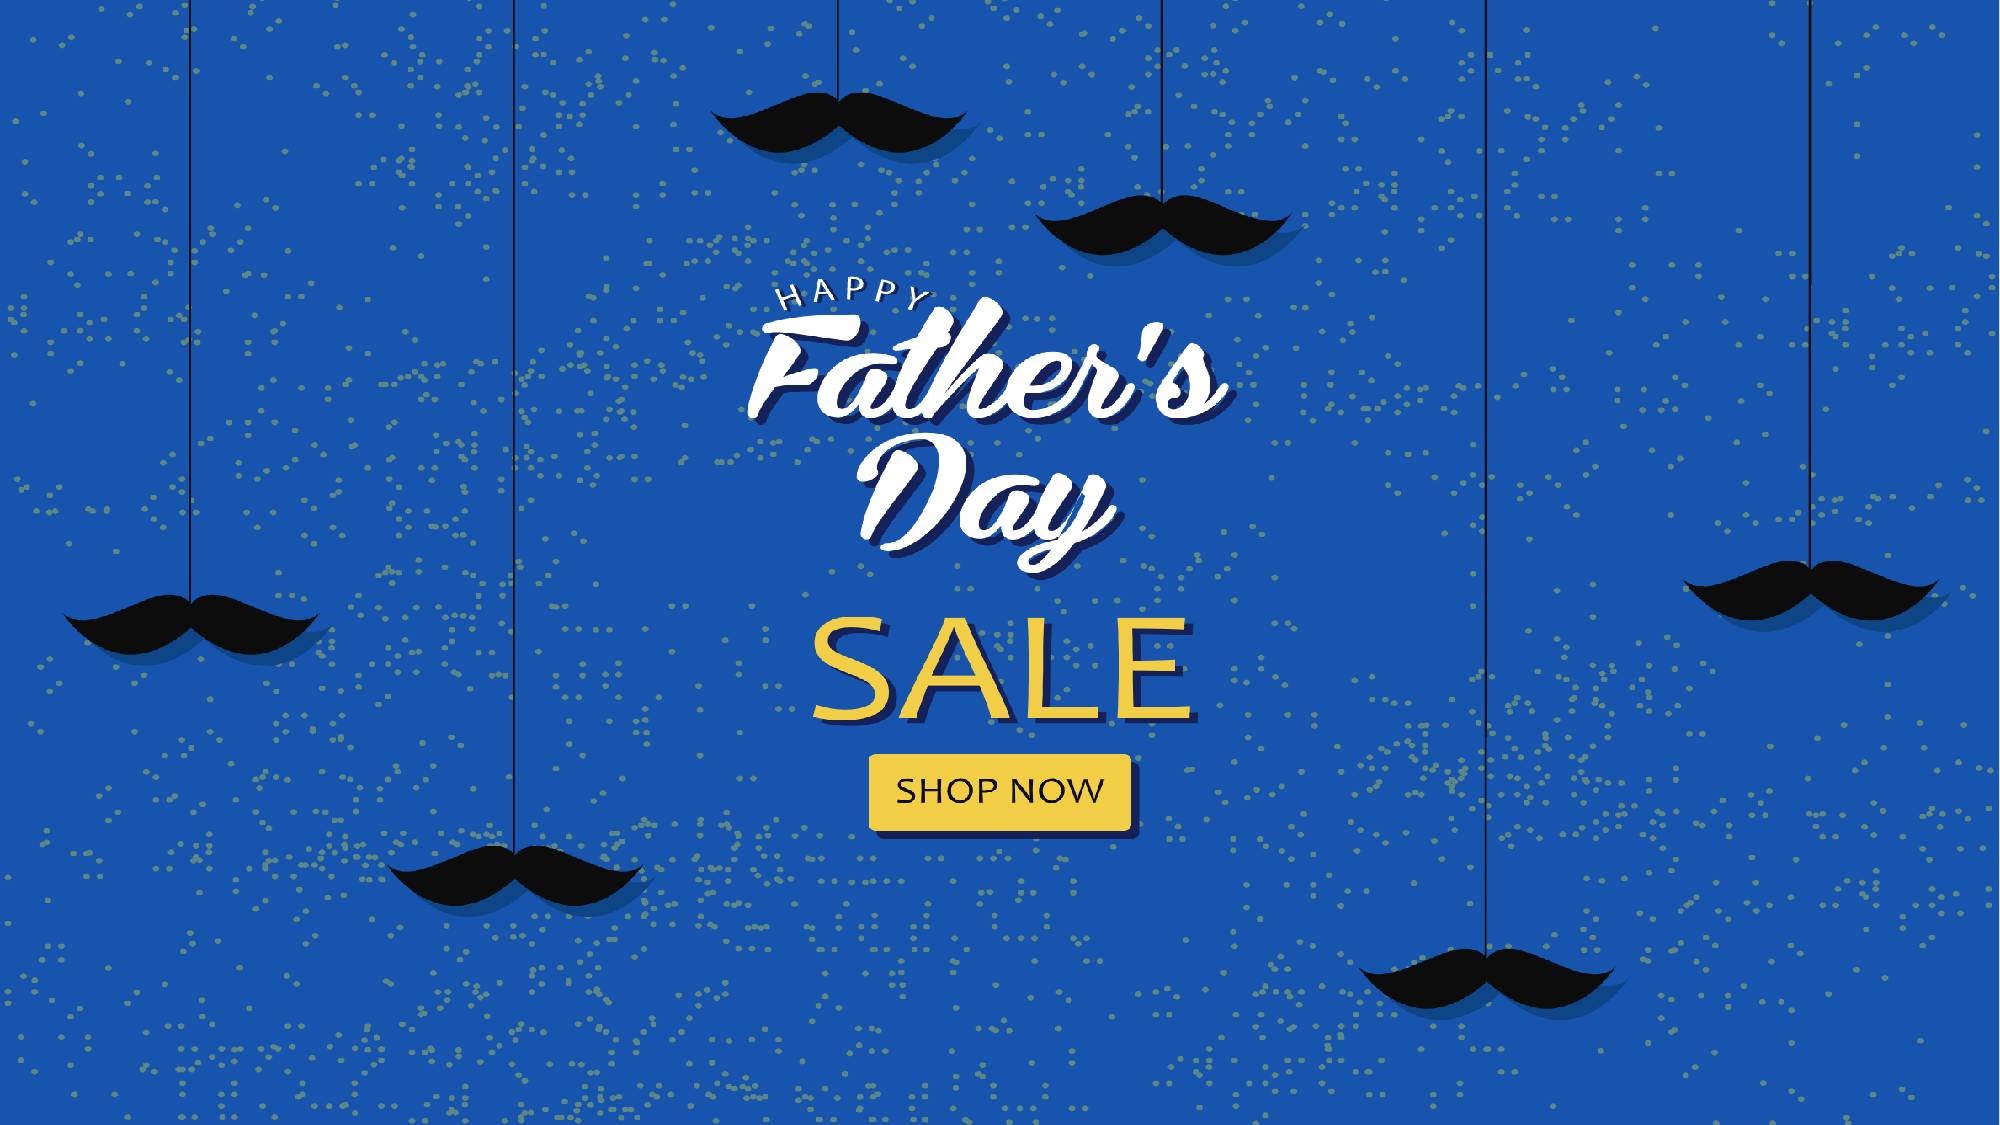 Best Father S Day Sales 2020 Final Deals At Lowe S Best Buy And Home Depot Tom S Guide Lowe's father's day 2020 sales are kicking off this weekend with huge deals on smart home tech, patio furniture and outdoor tools. best father s day sales 2020 final